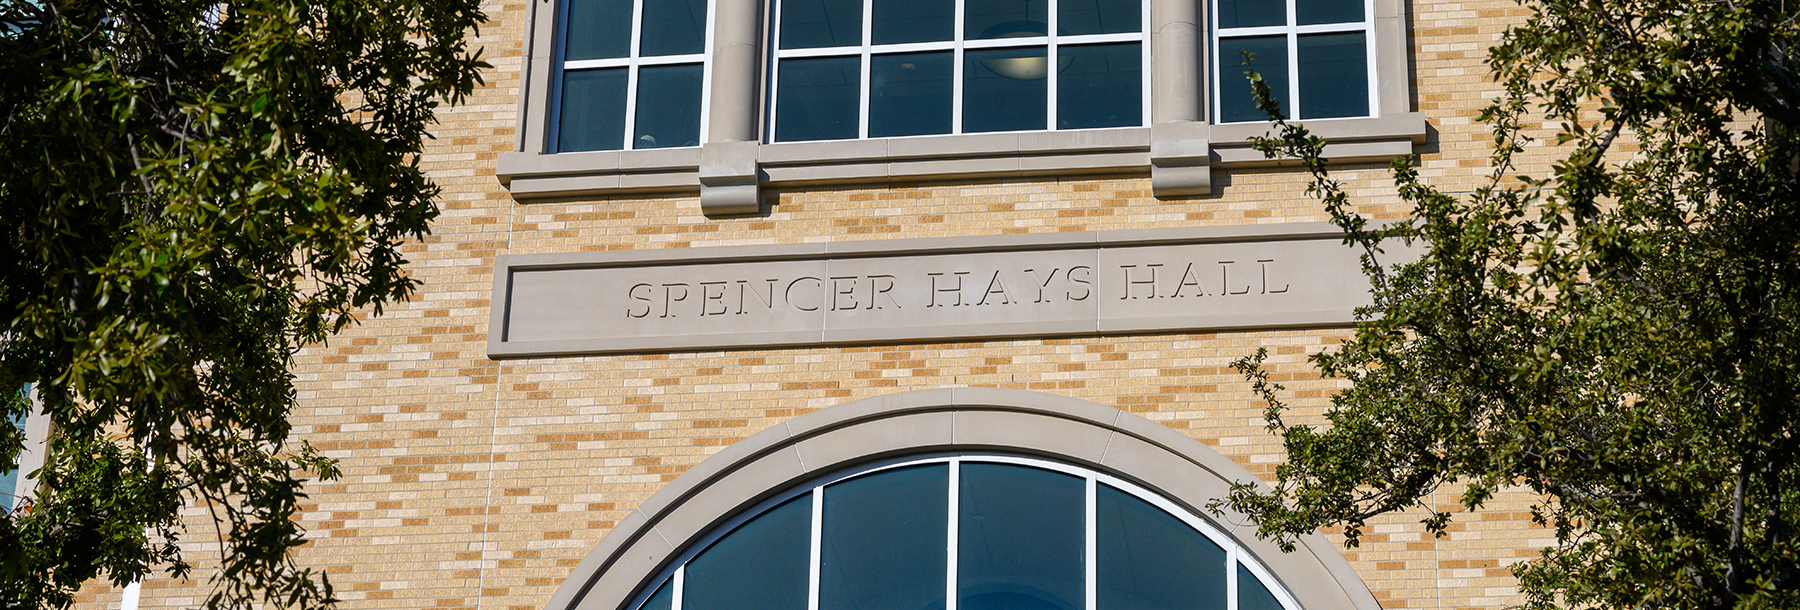 Section Image: Hays Hall sign 